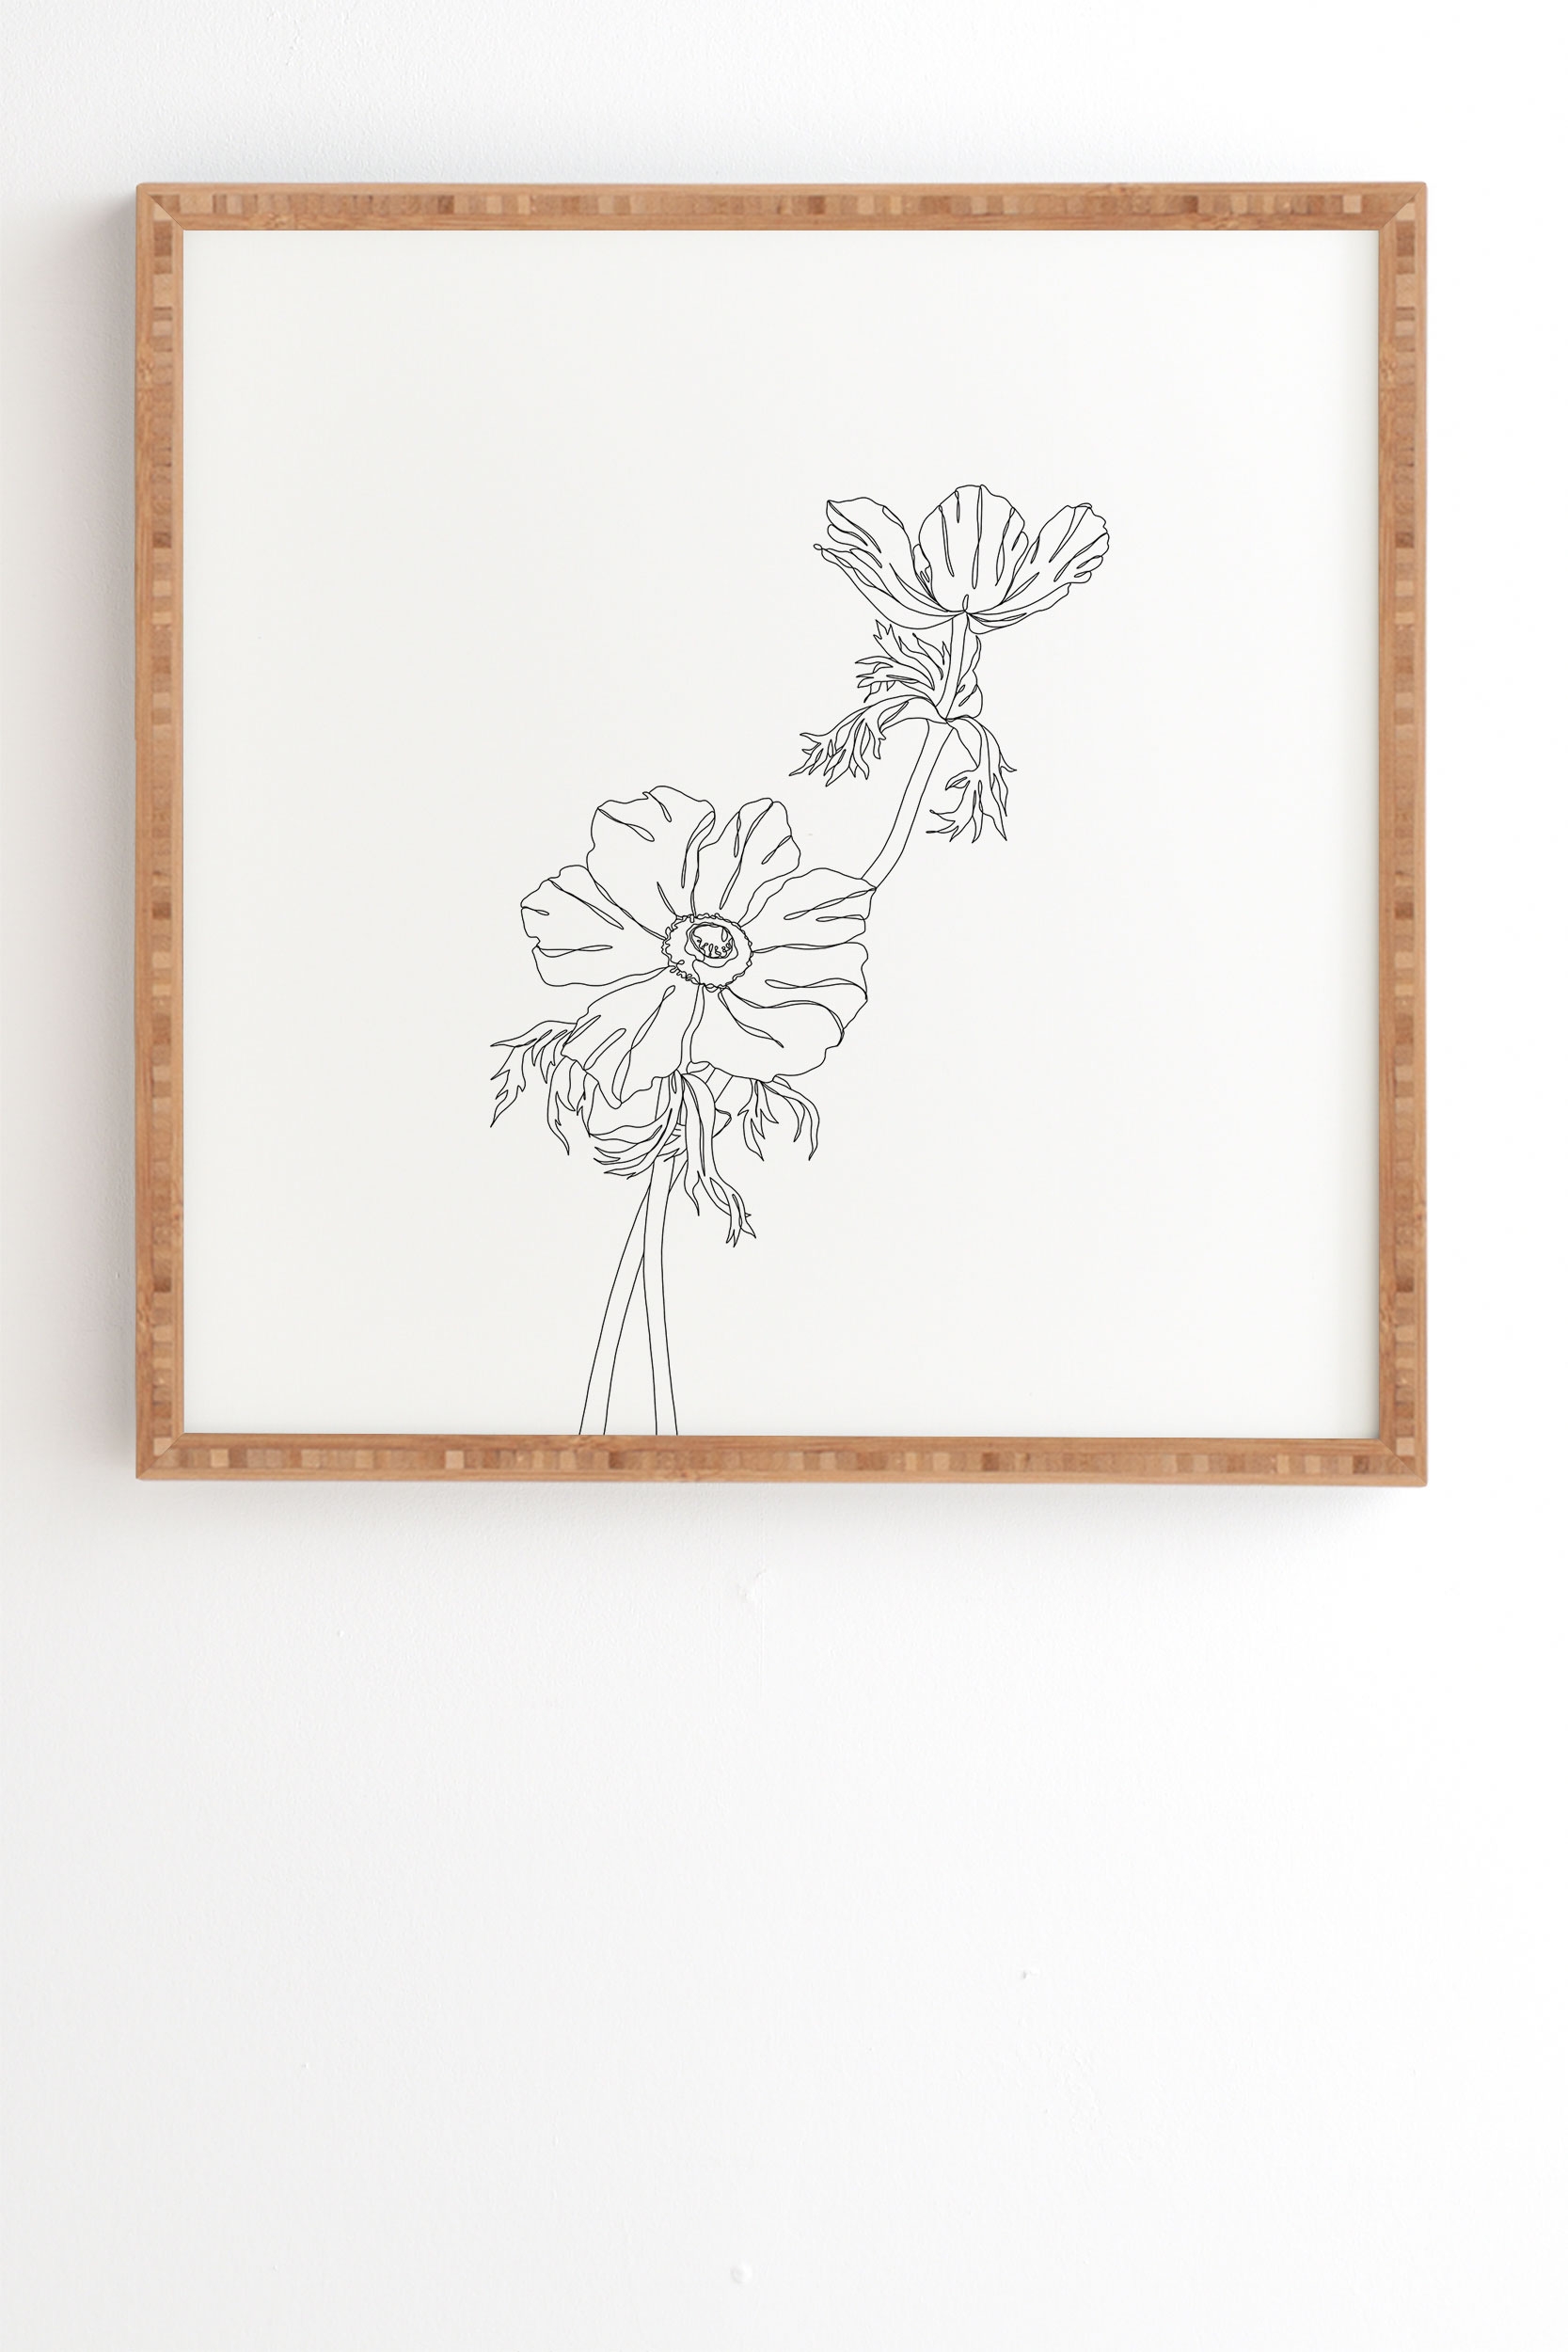 Botanical Illustration Joan by The Colour Study - Framed Wall Art Bamboo 8" x 9.5" - Image 1